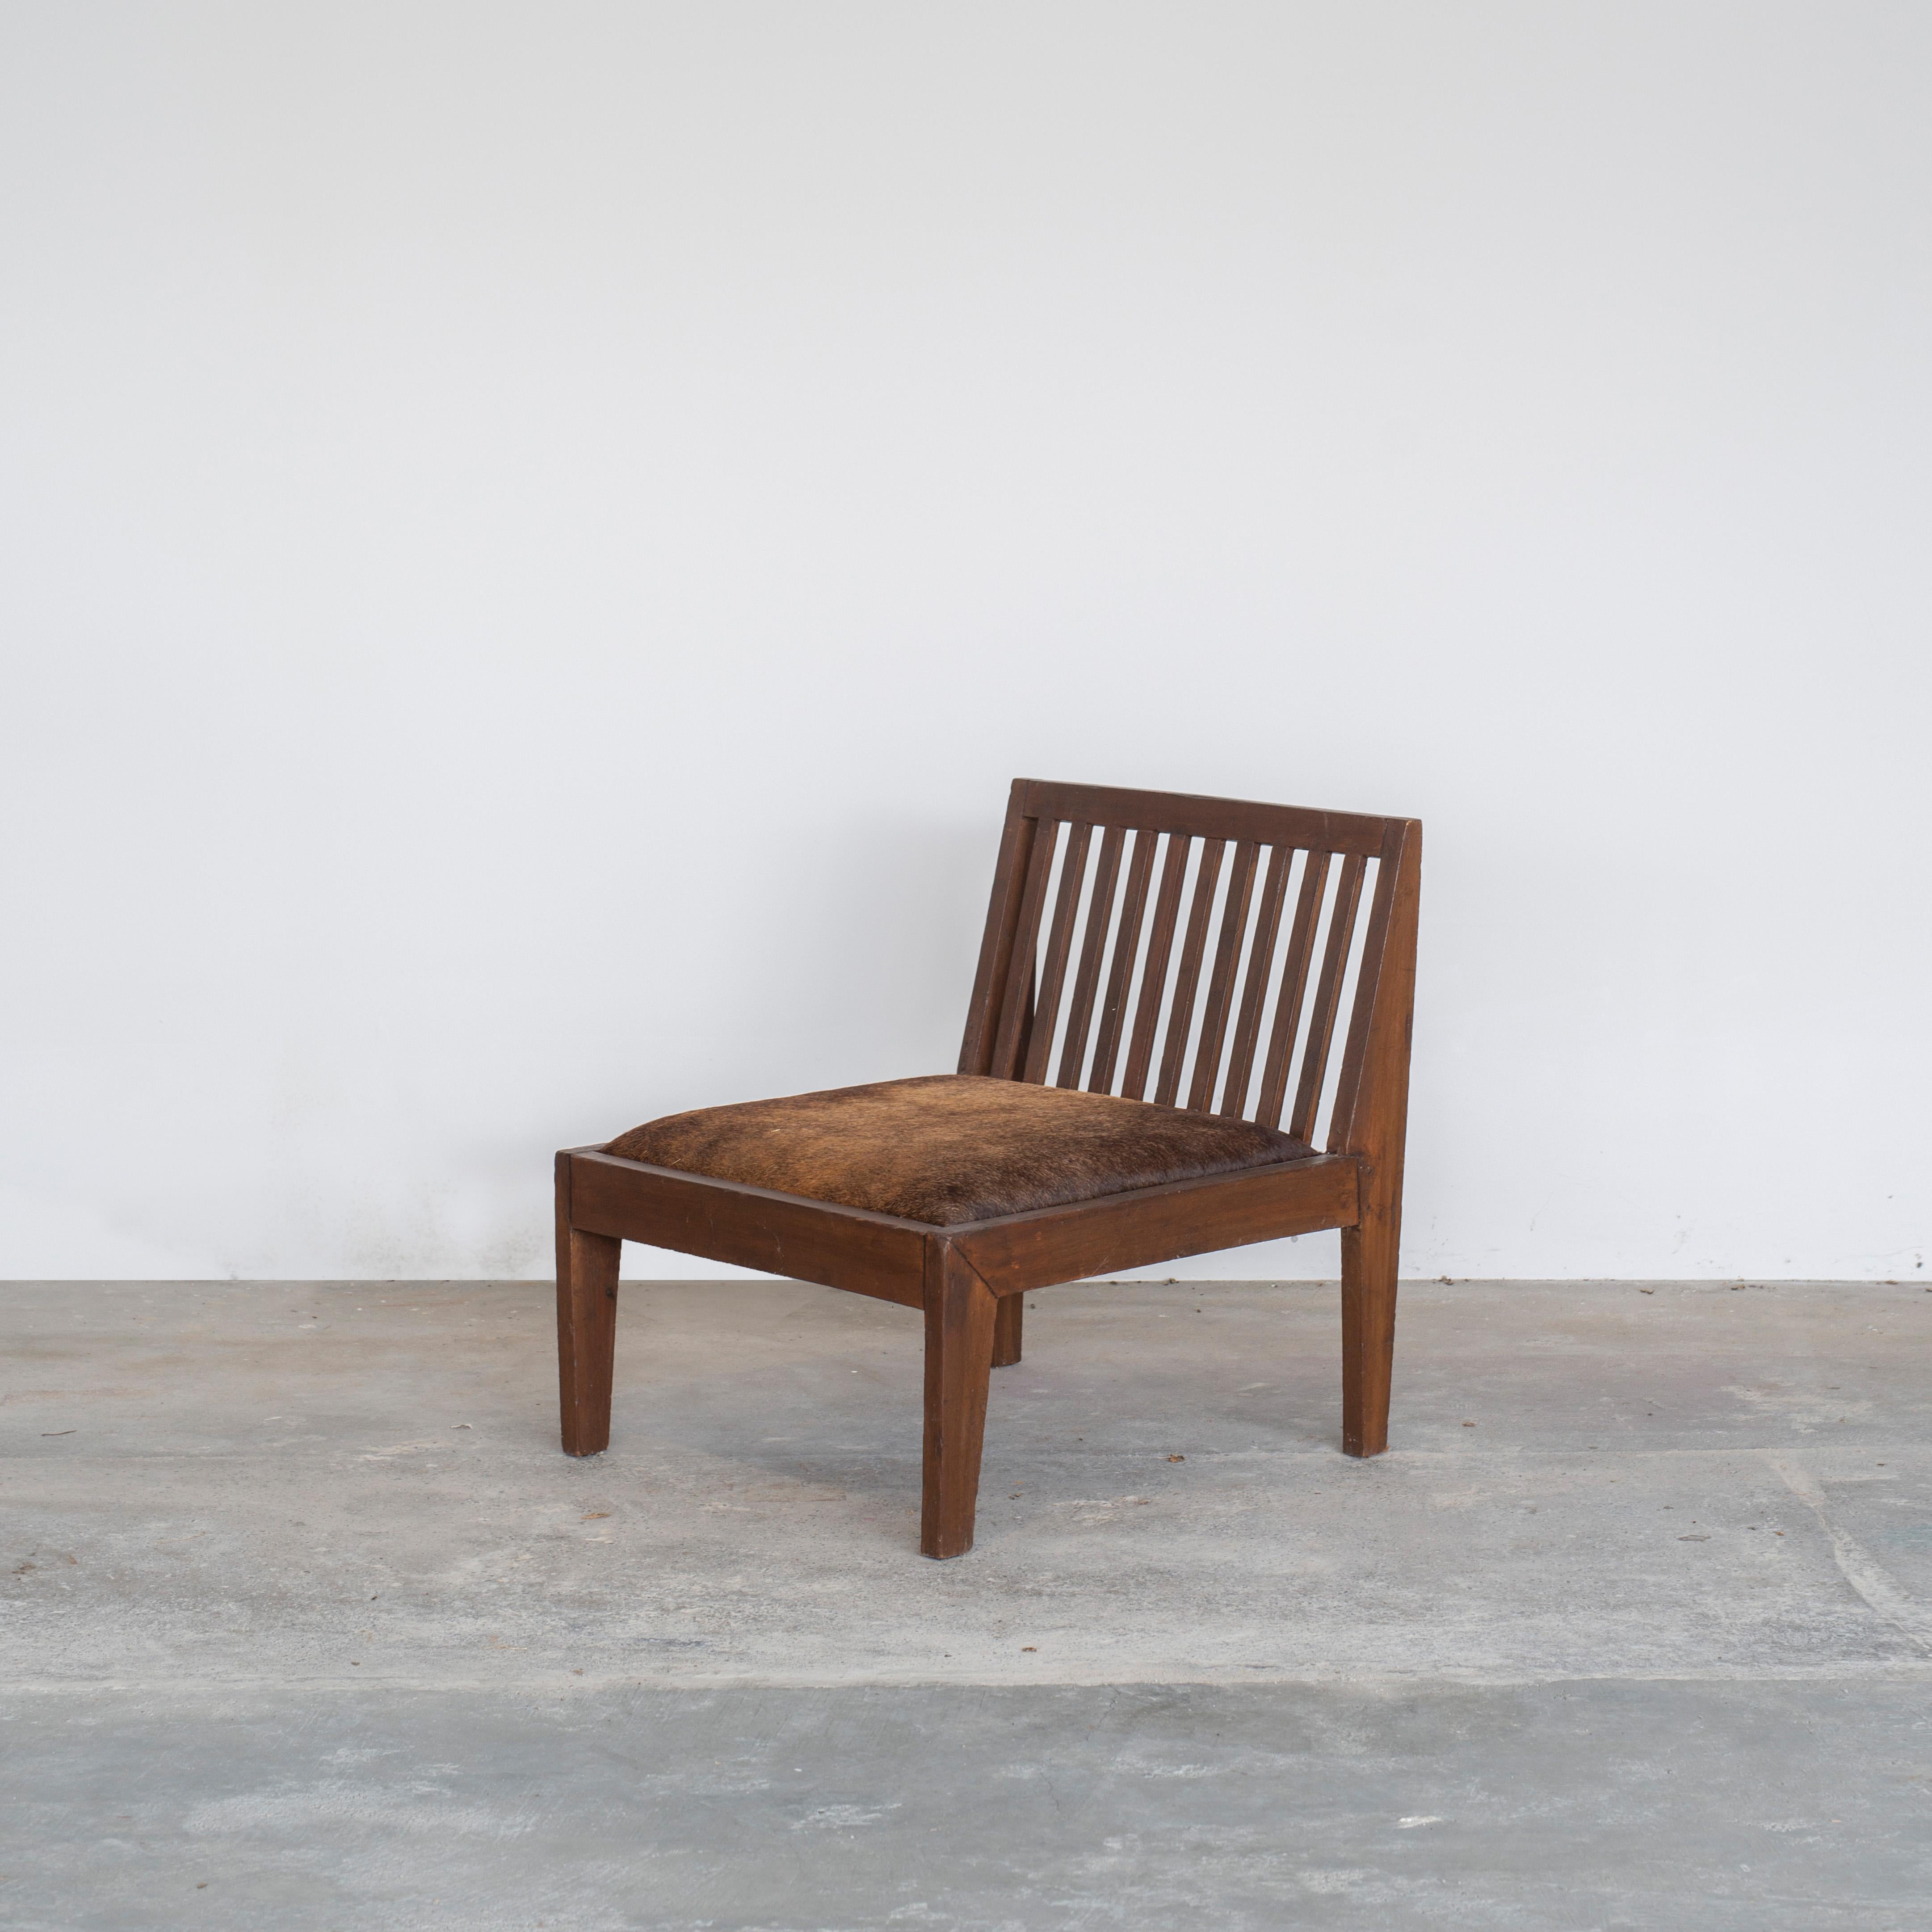 This chair with its characteristic A-shaped profile is a rare classic of history. Through its sophisticated proportions and its elegant shape, the chair represents the timeless mindset of modernist architecture and design. It consists of solid teak